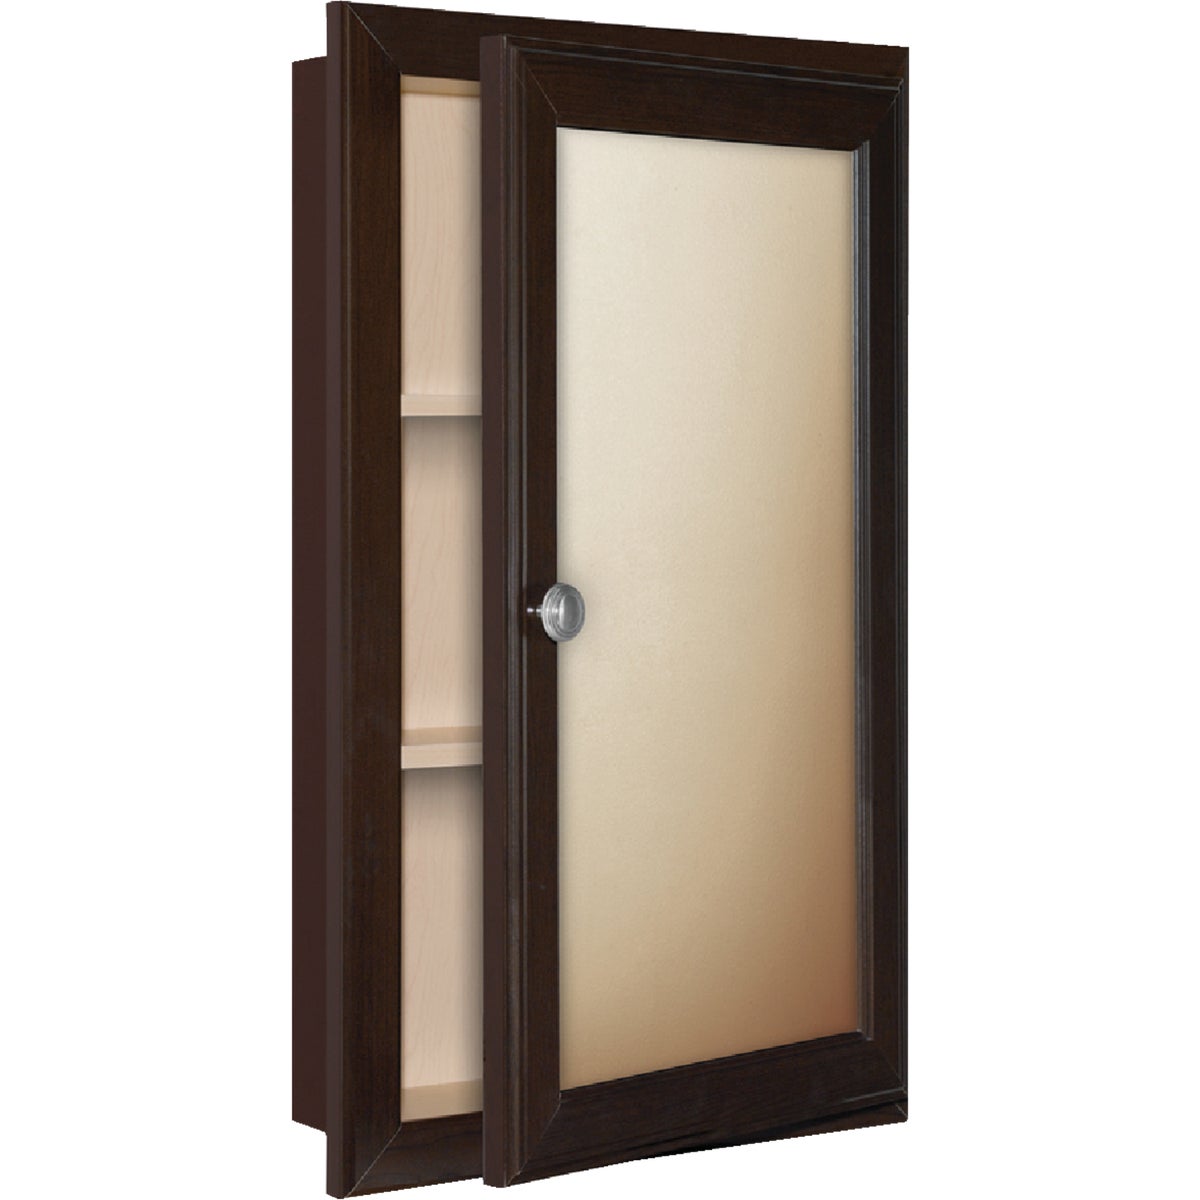 Item 260865, The swing-door medicine cabinet brings fresh style to your bath.